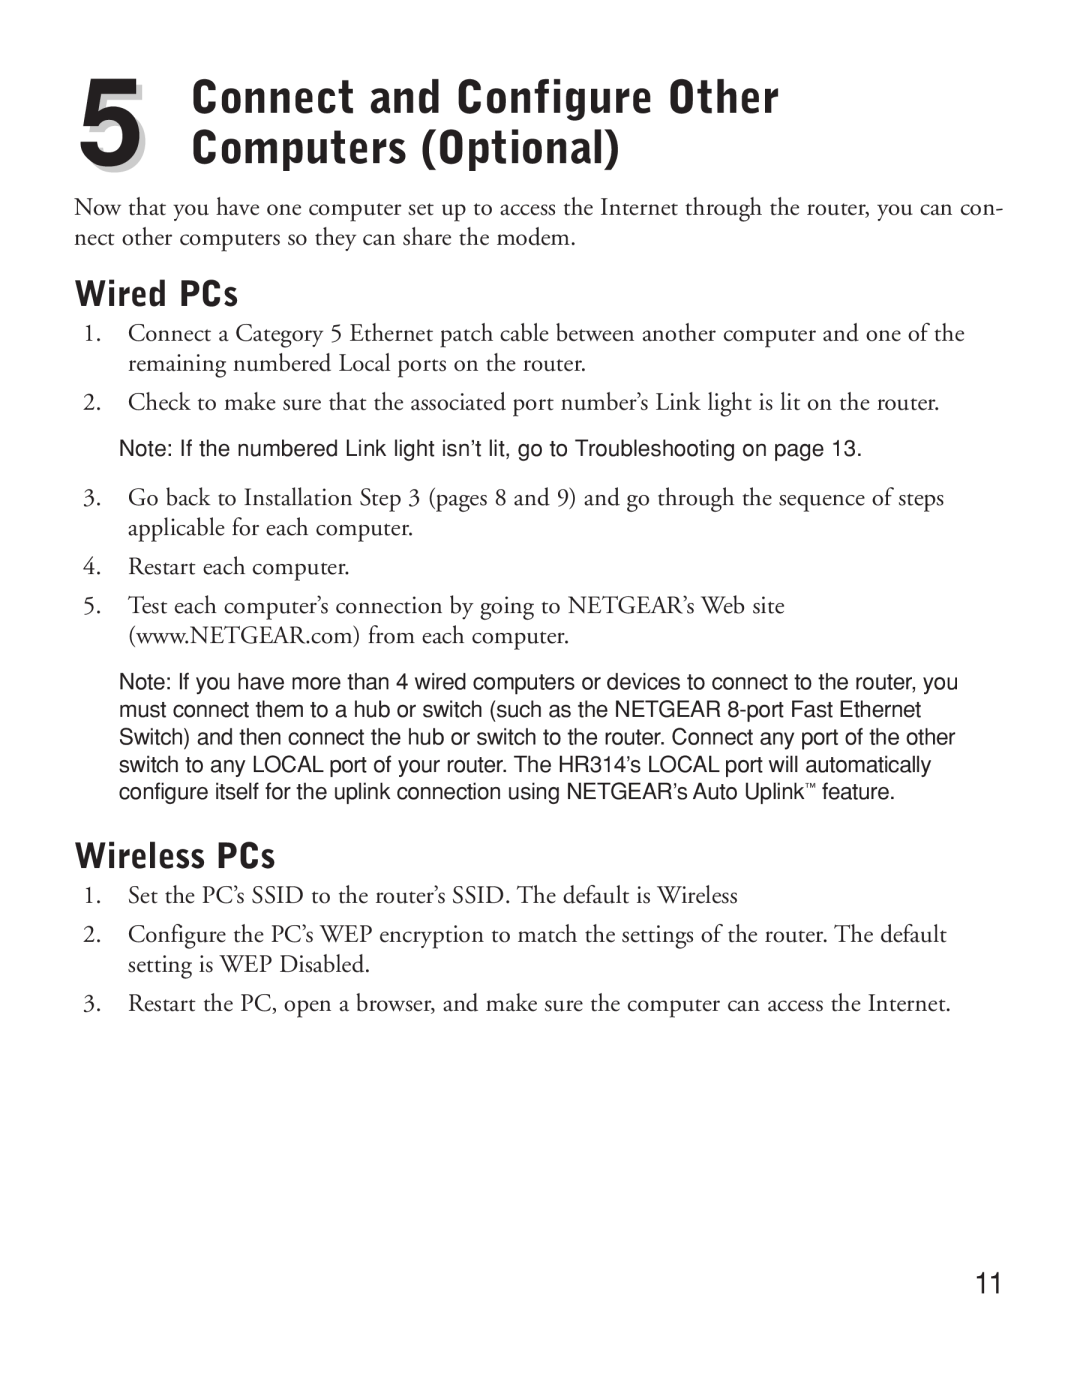 NETGEAR HR314 manual Connect and Configure Other Computers Optional, Wired PCs, Wireless PCs 